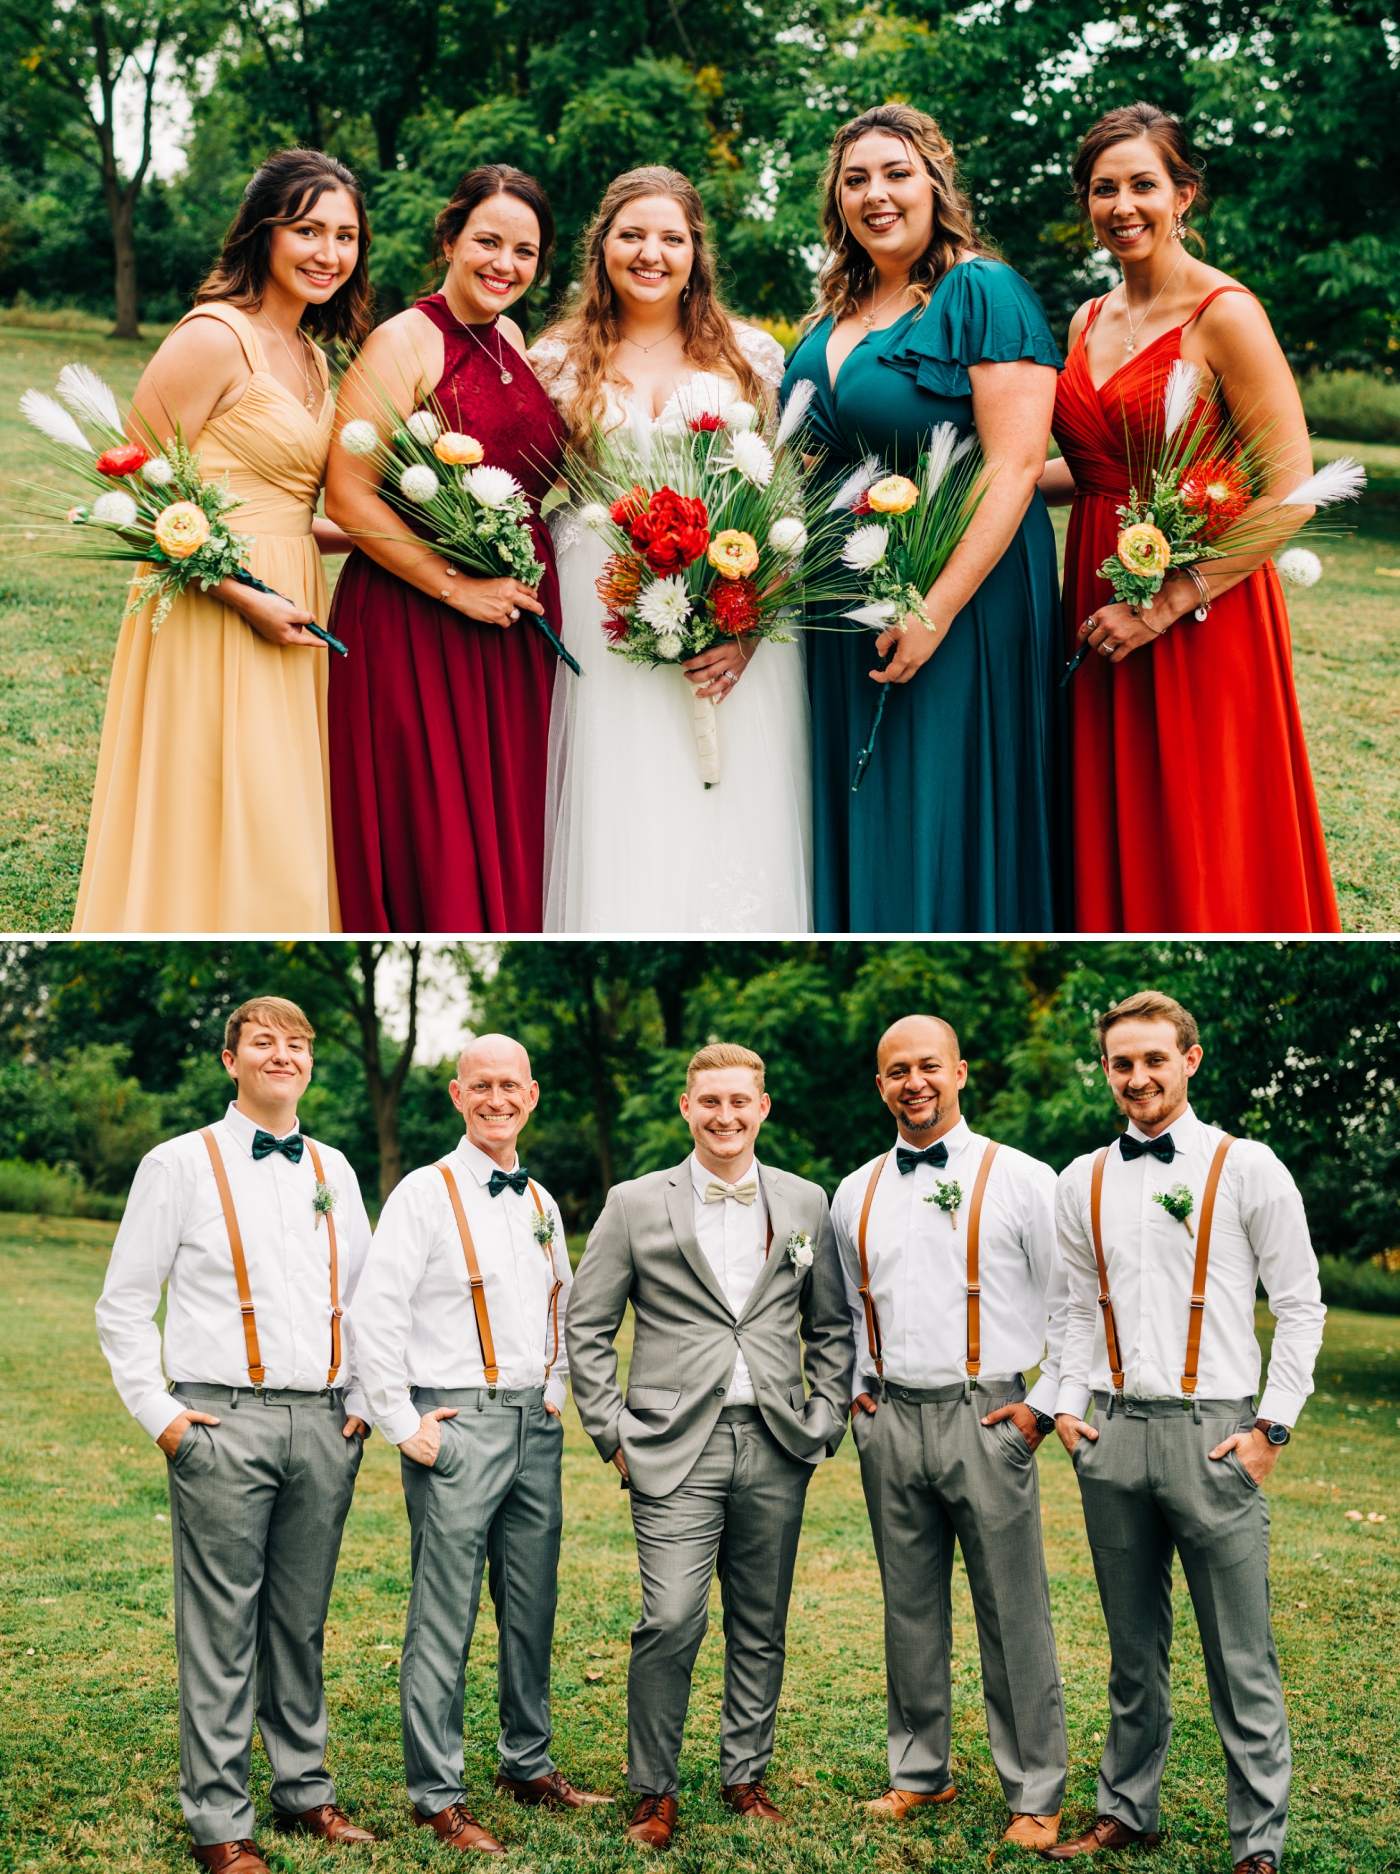 Bridesmaids in gold, red and blue chiffon dresses